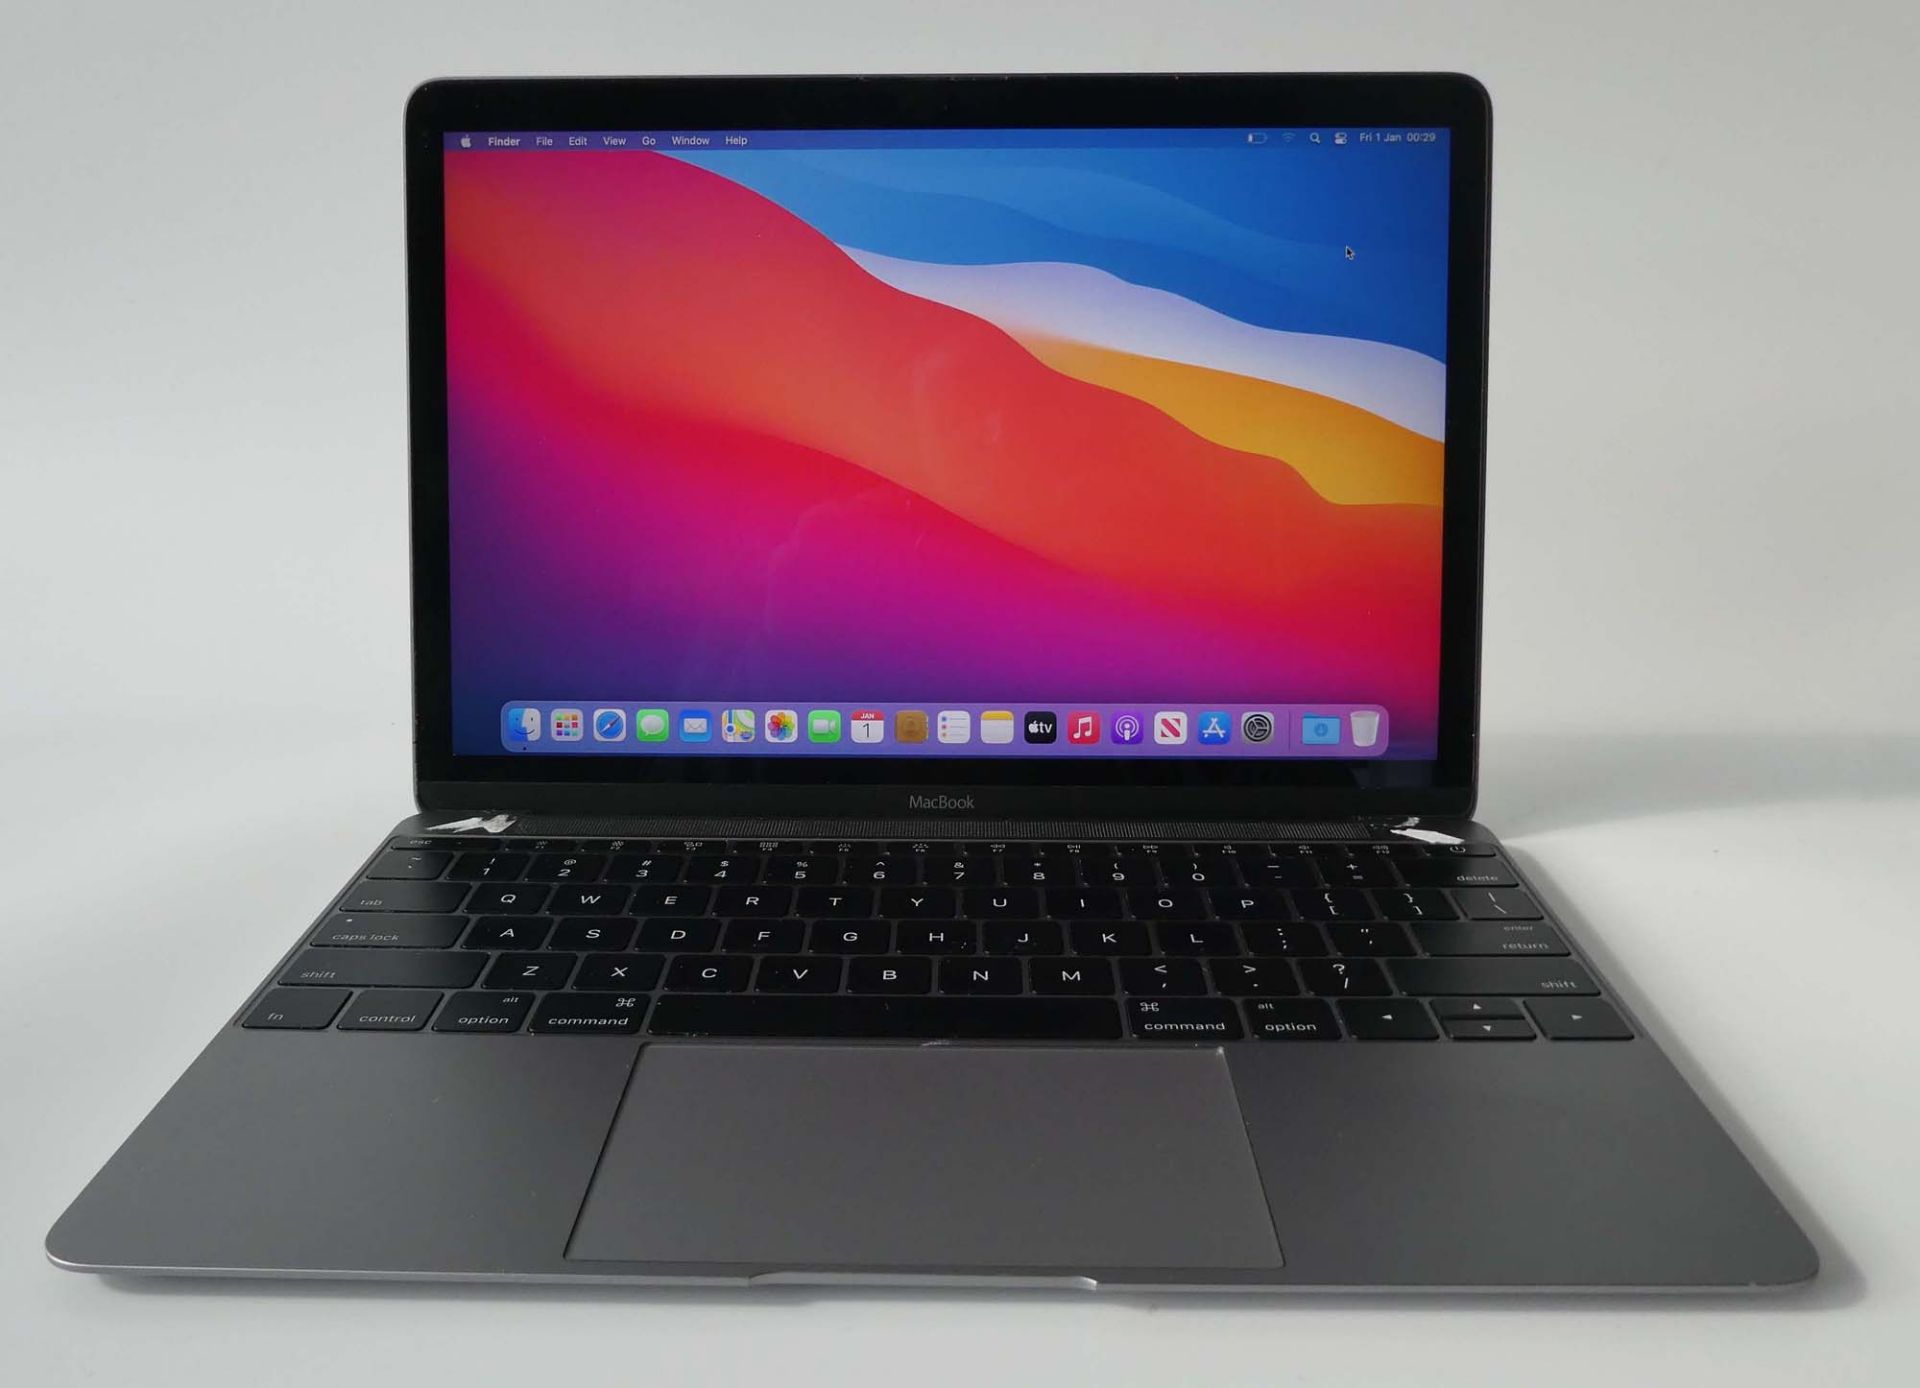 MacBook 2015 A1534 Retina 12'' laptop with 8GB RAM and 256GB SSD